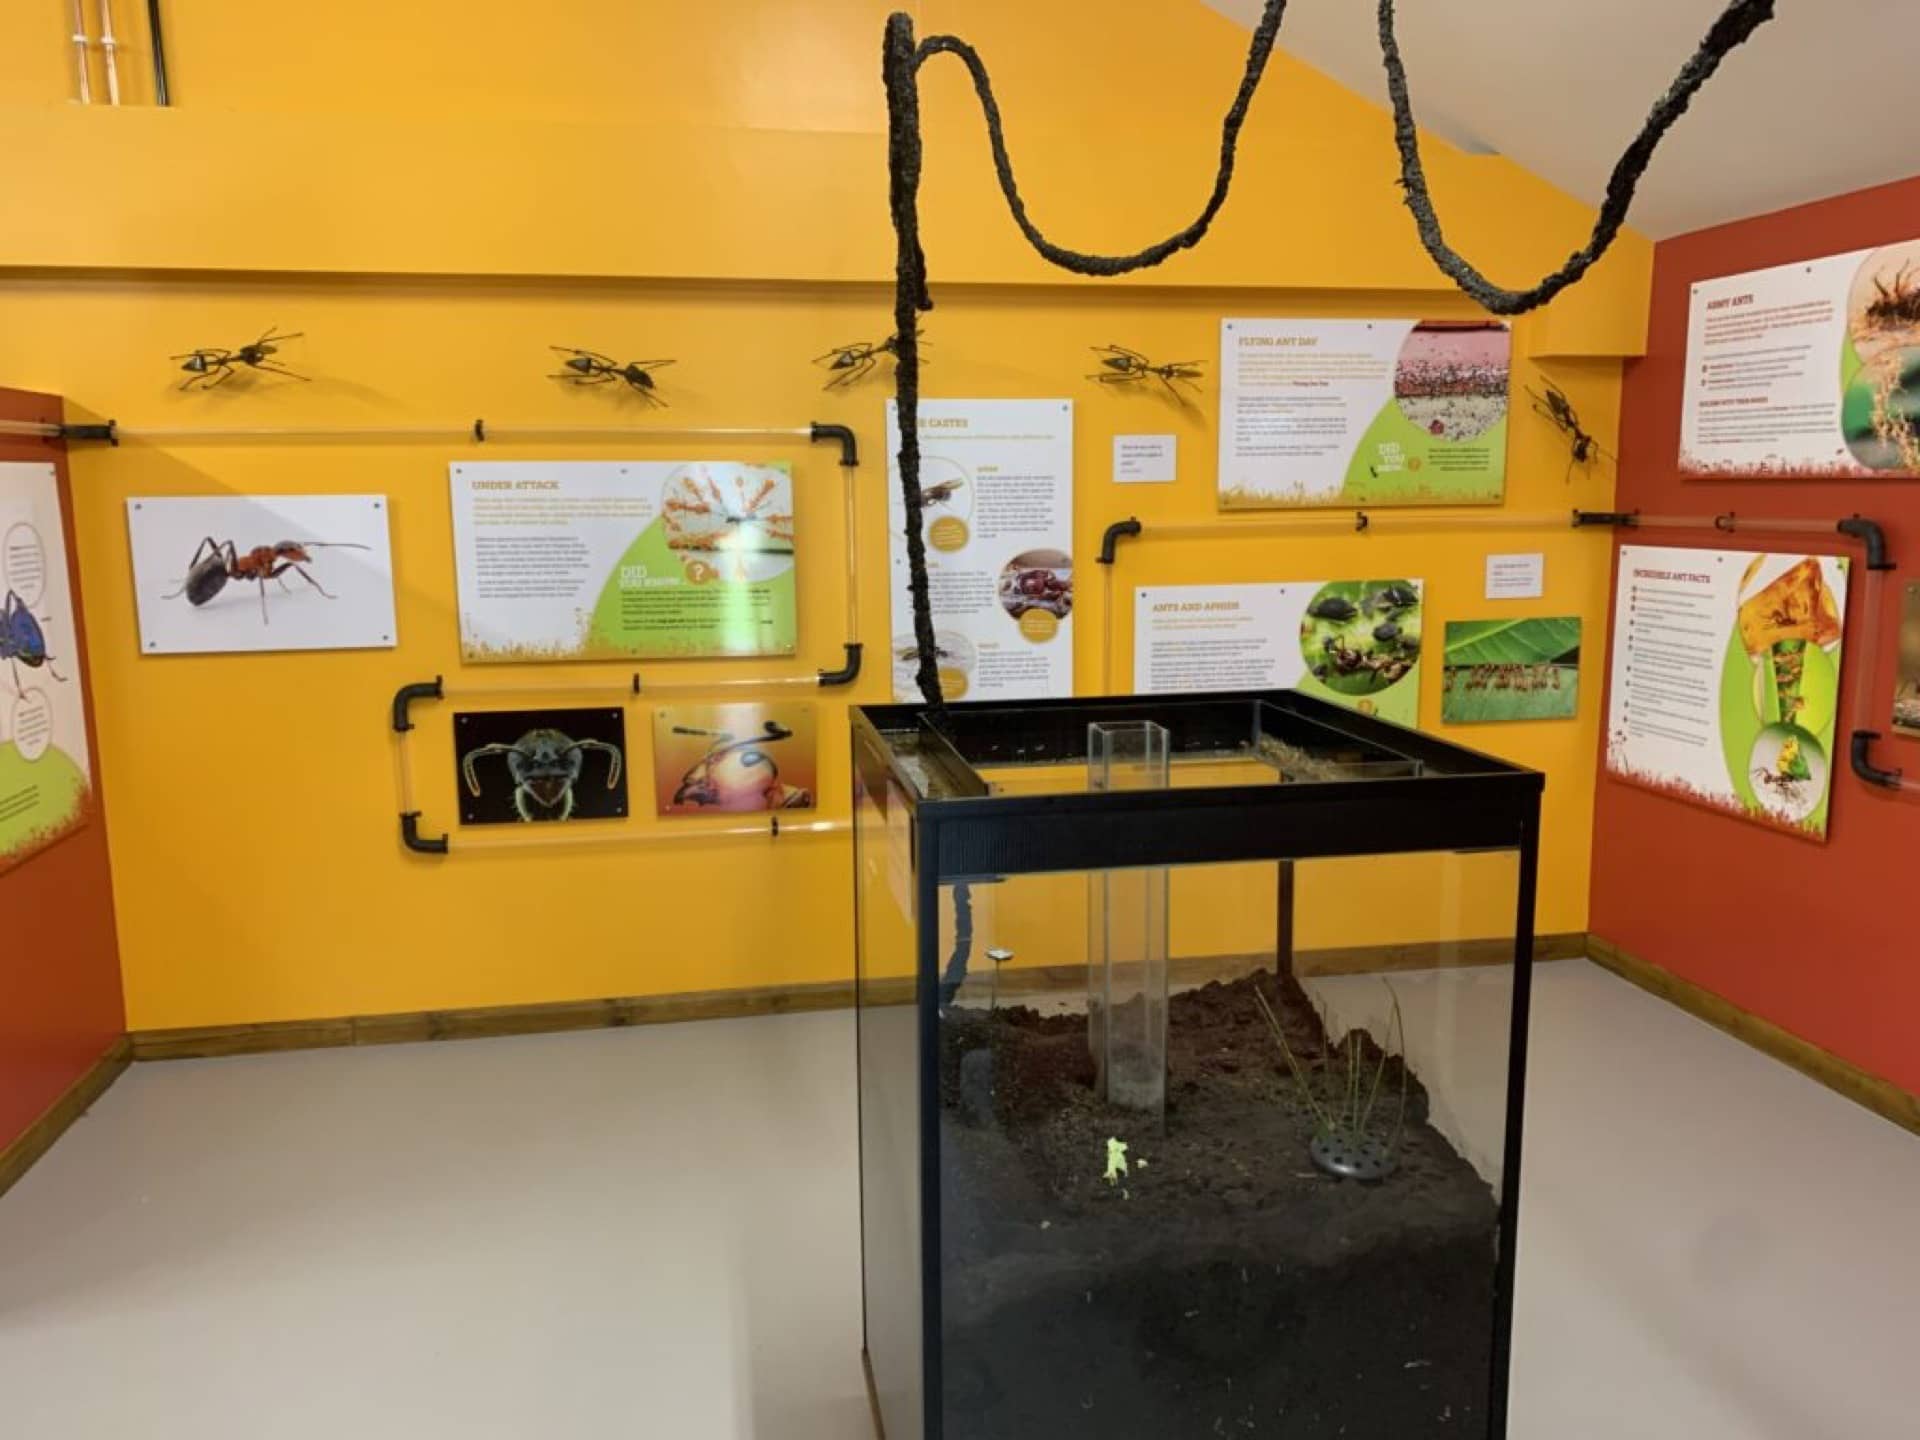 Insect displays and glass containers